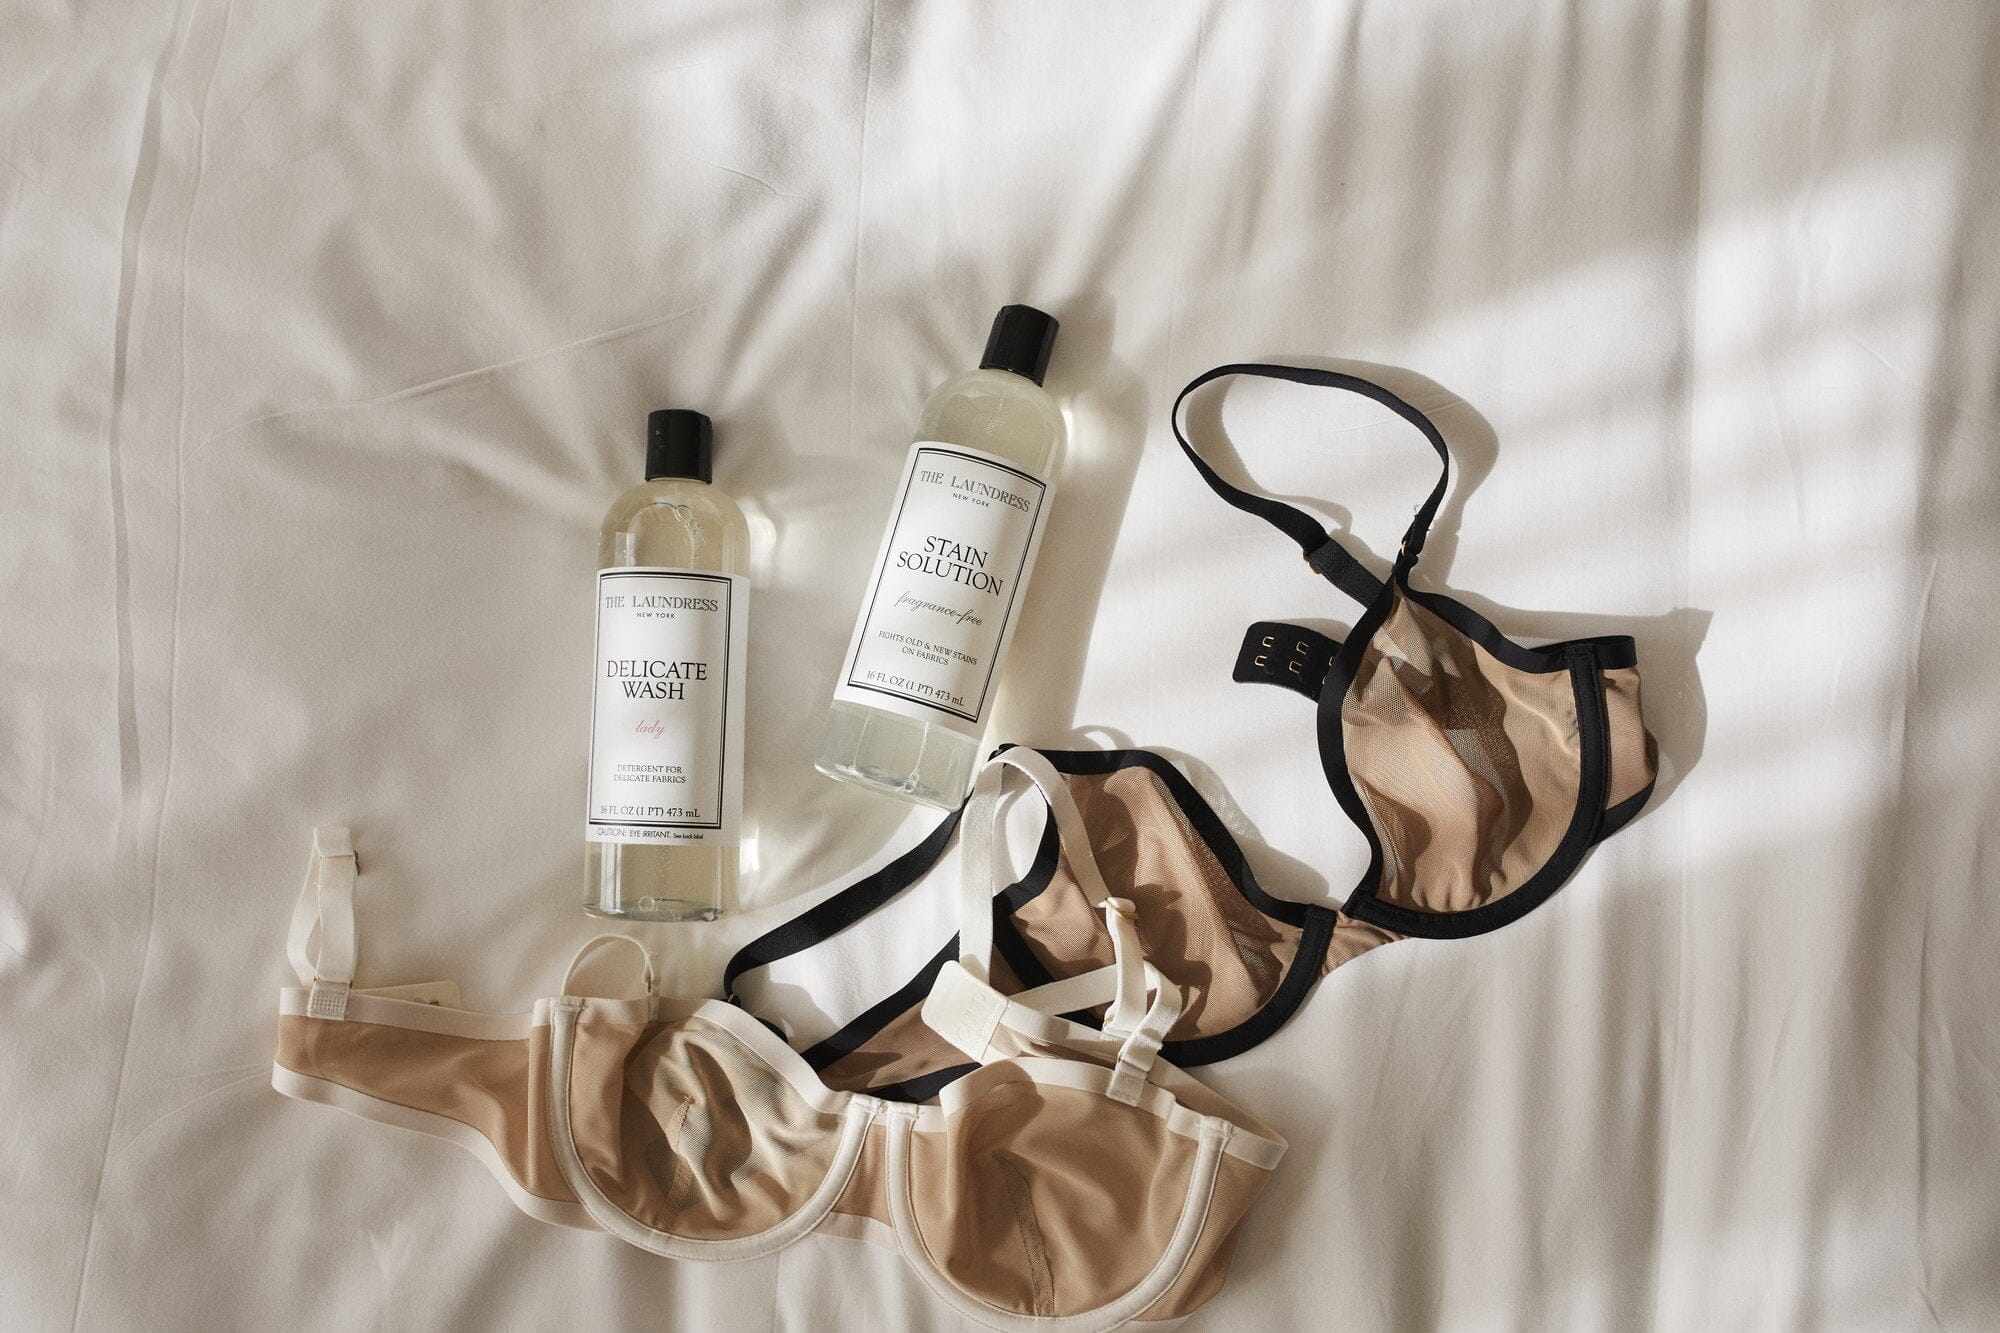 How To Launder Your Lingerie – The Laundress